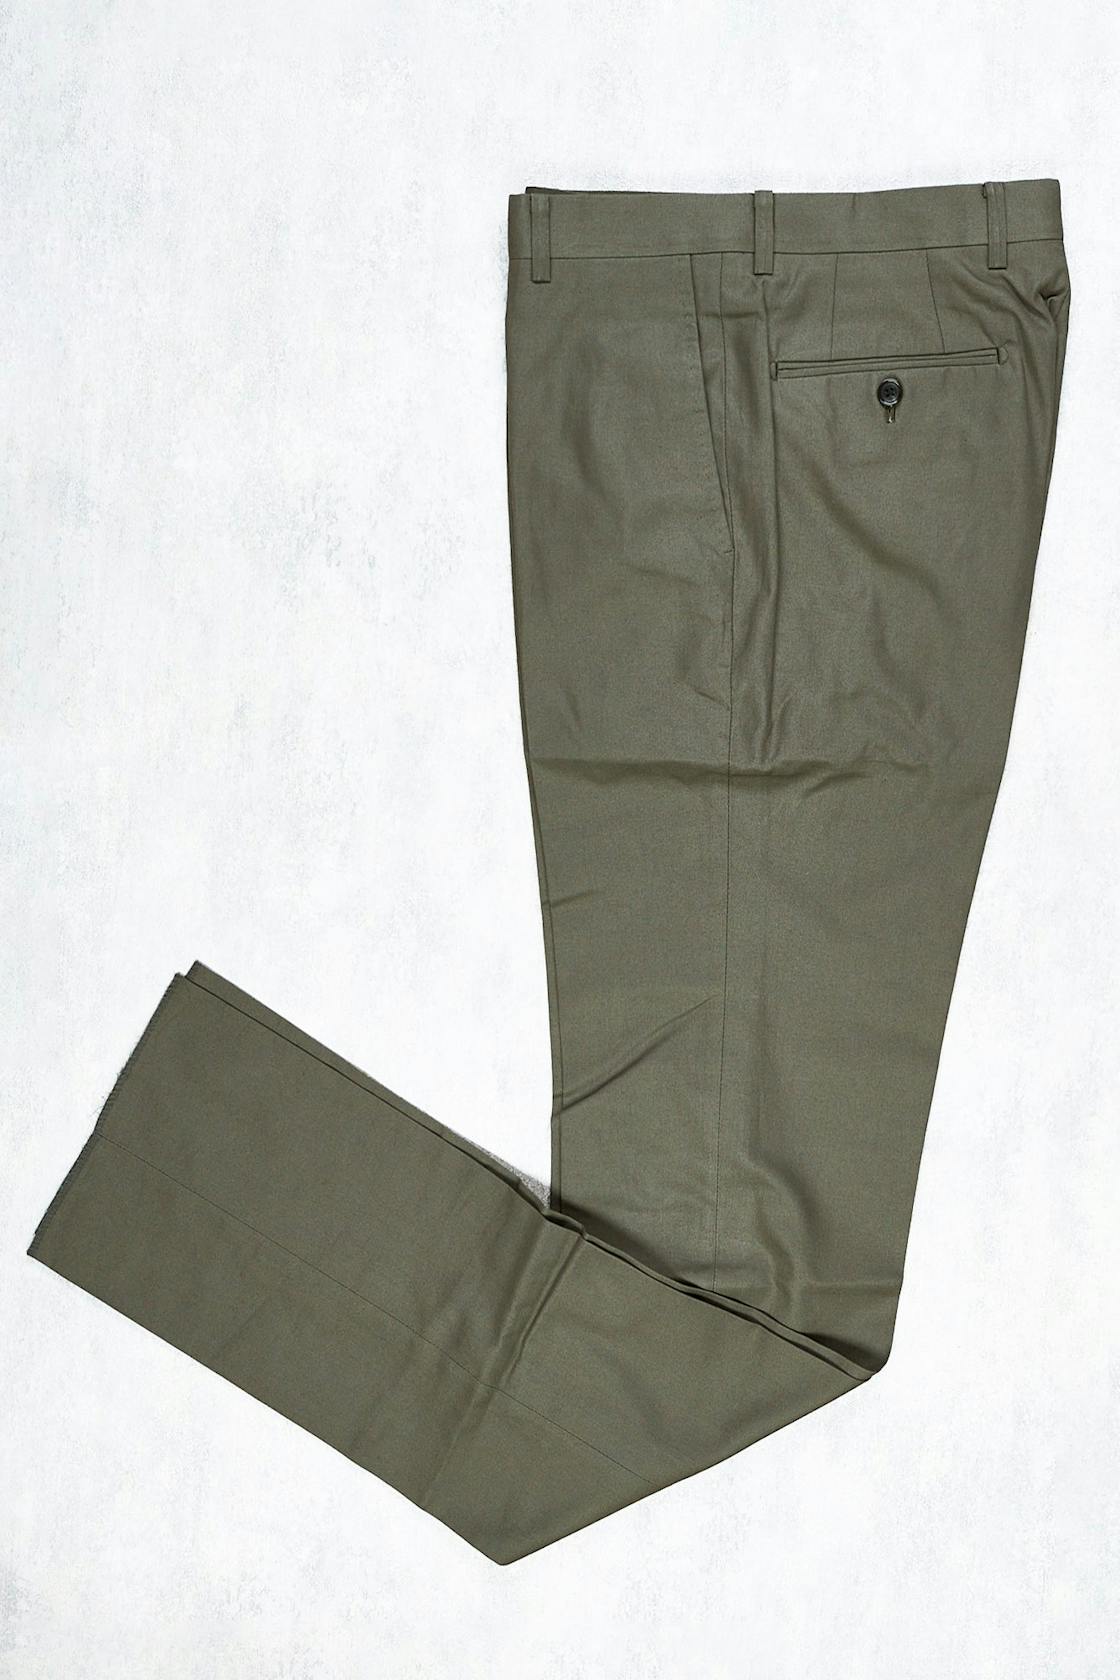 Ring Jacket AMP03 Olive Green Cotton Chinos